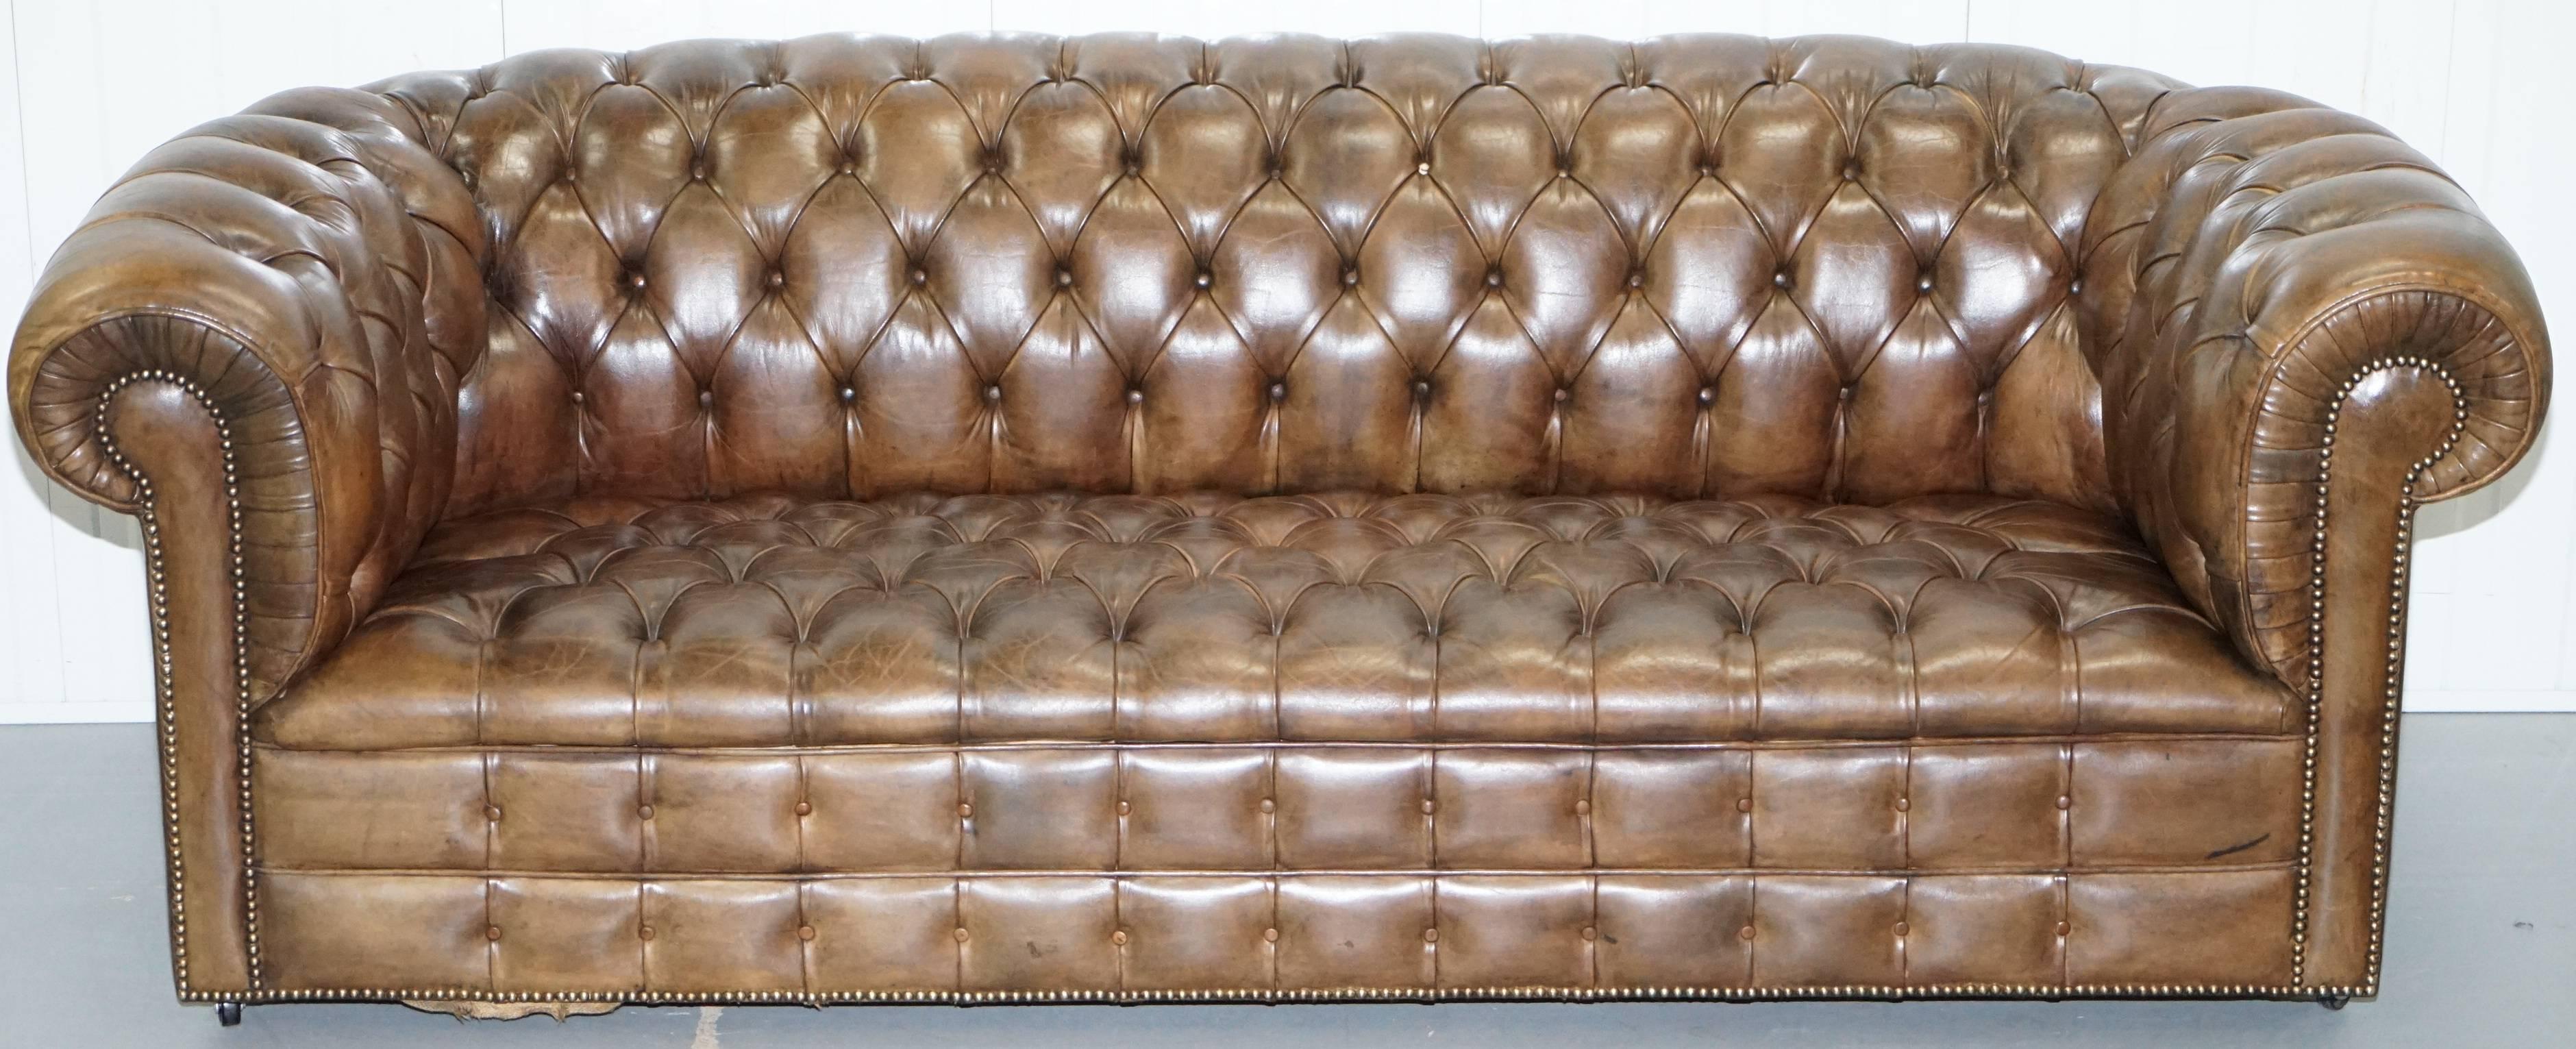 We are delighted to offer for sale this very rare original vintage hand dyed cigar brown leather gentleman’s Chesterfield club sofa

I have the matching four seater which is being restored in the next few weeks 

When looking at Chesterfield